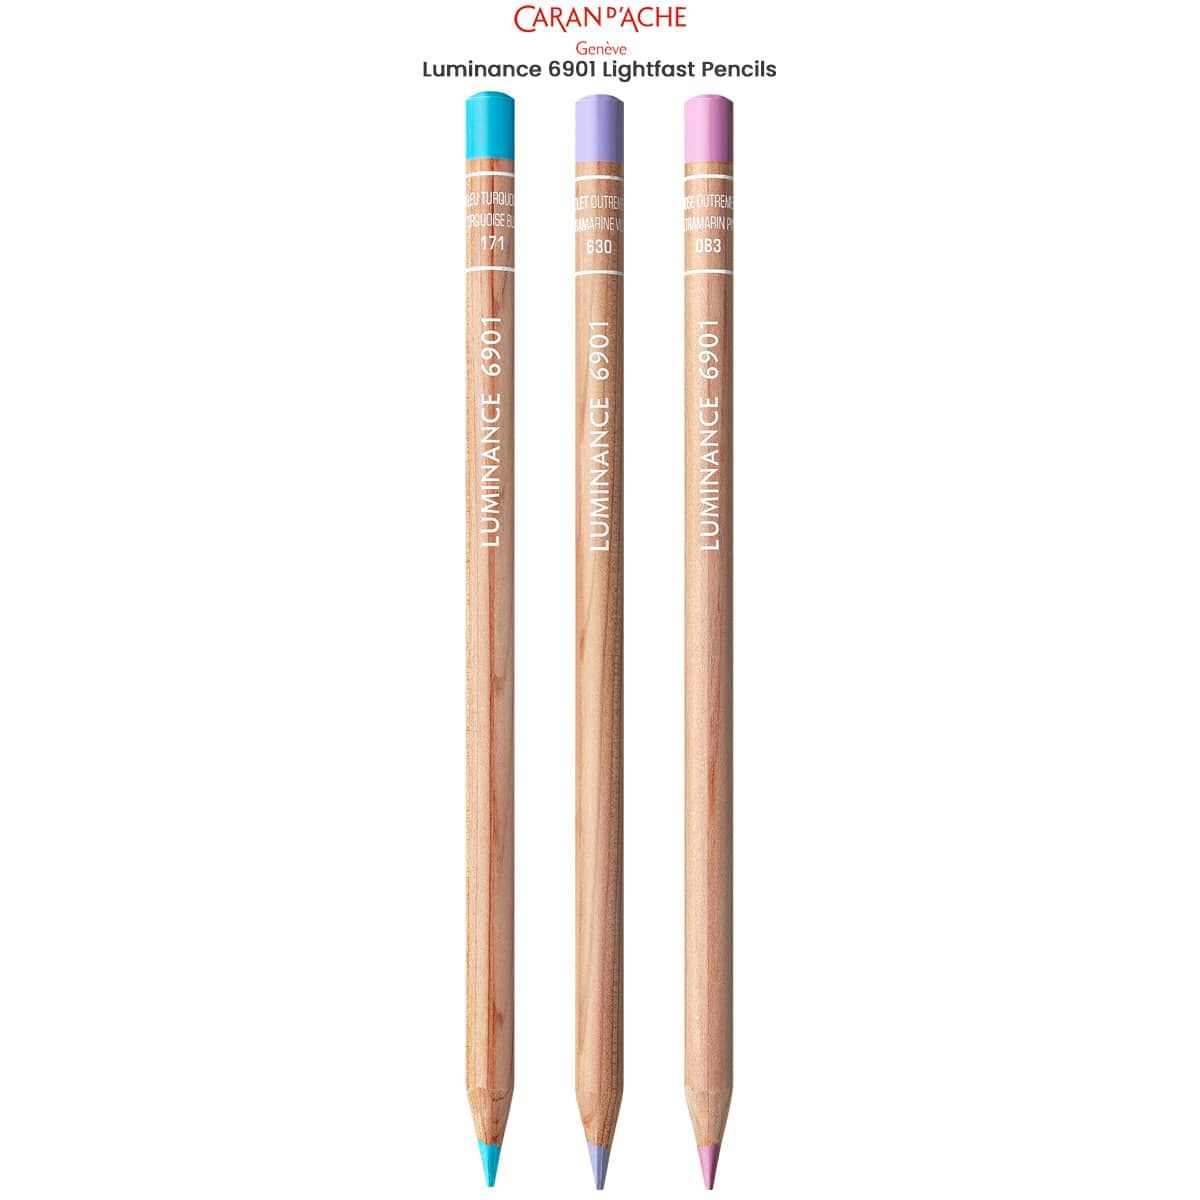 3-Rocks White Natural Slate Pencils, Pack of 10 pencil-Best